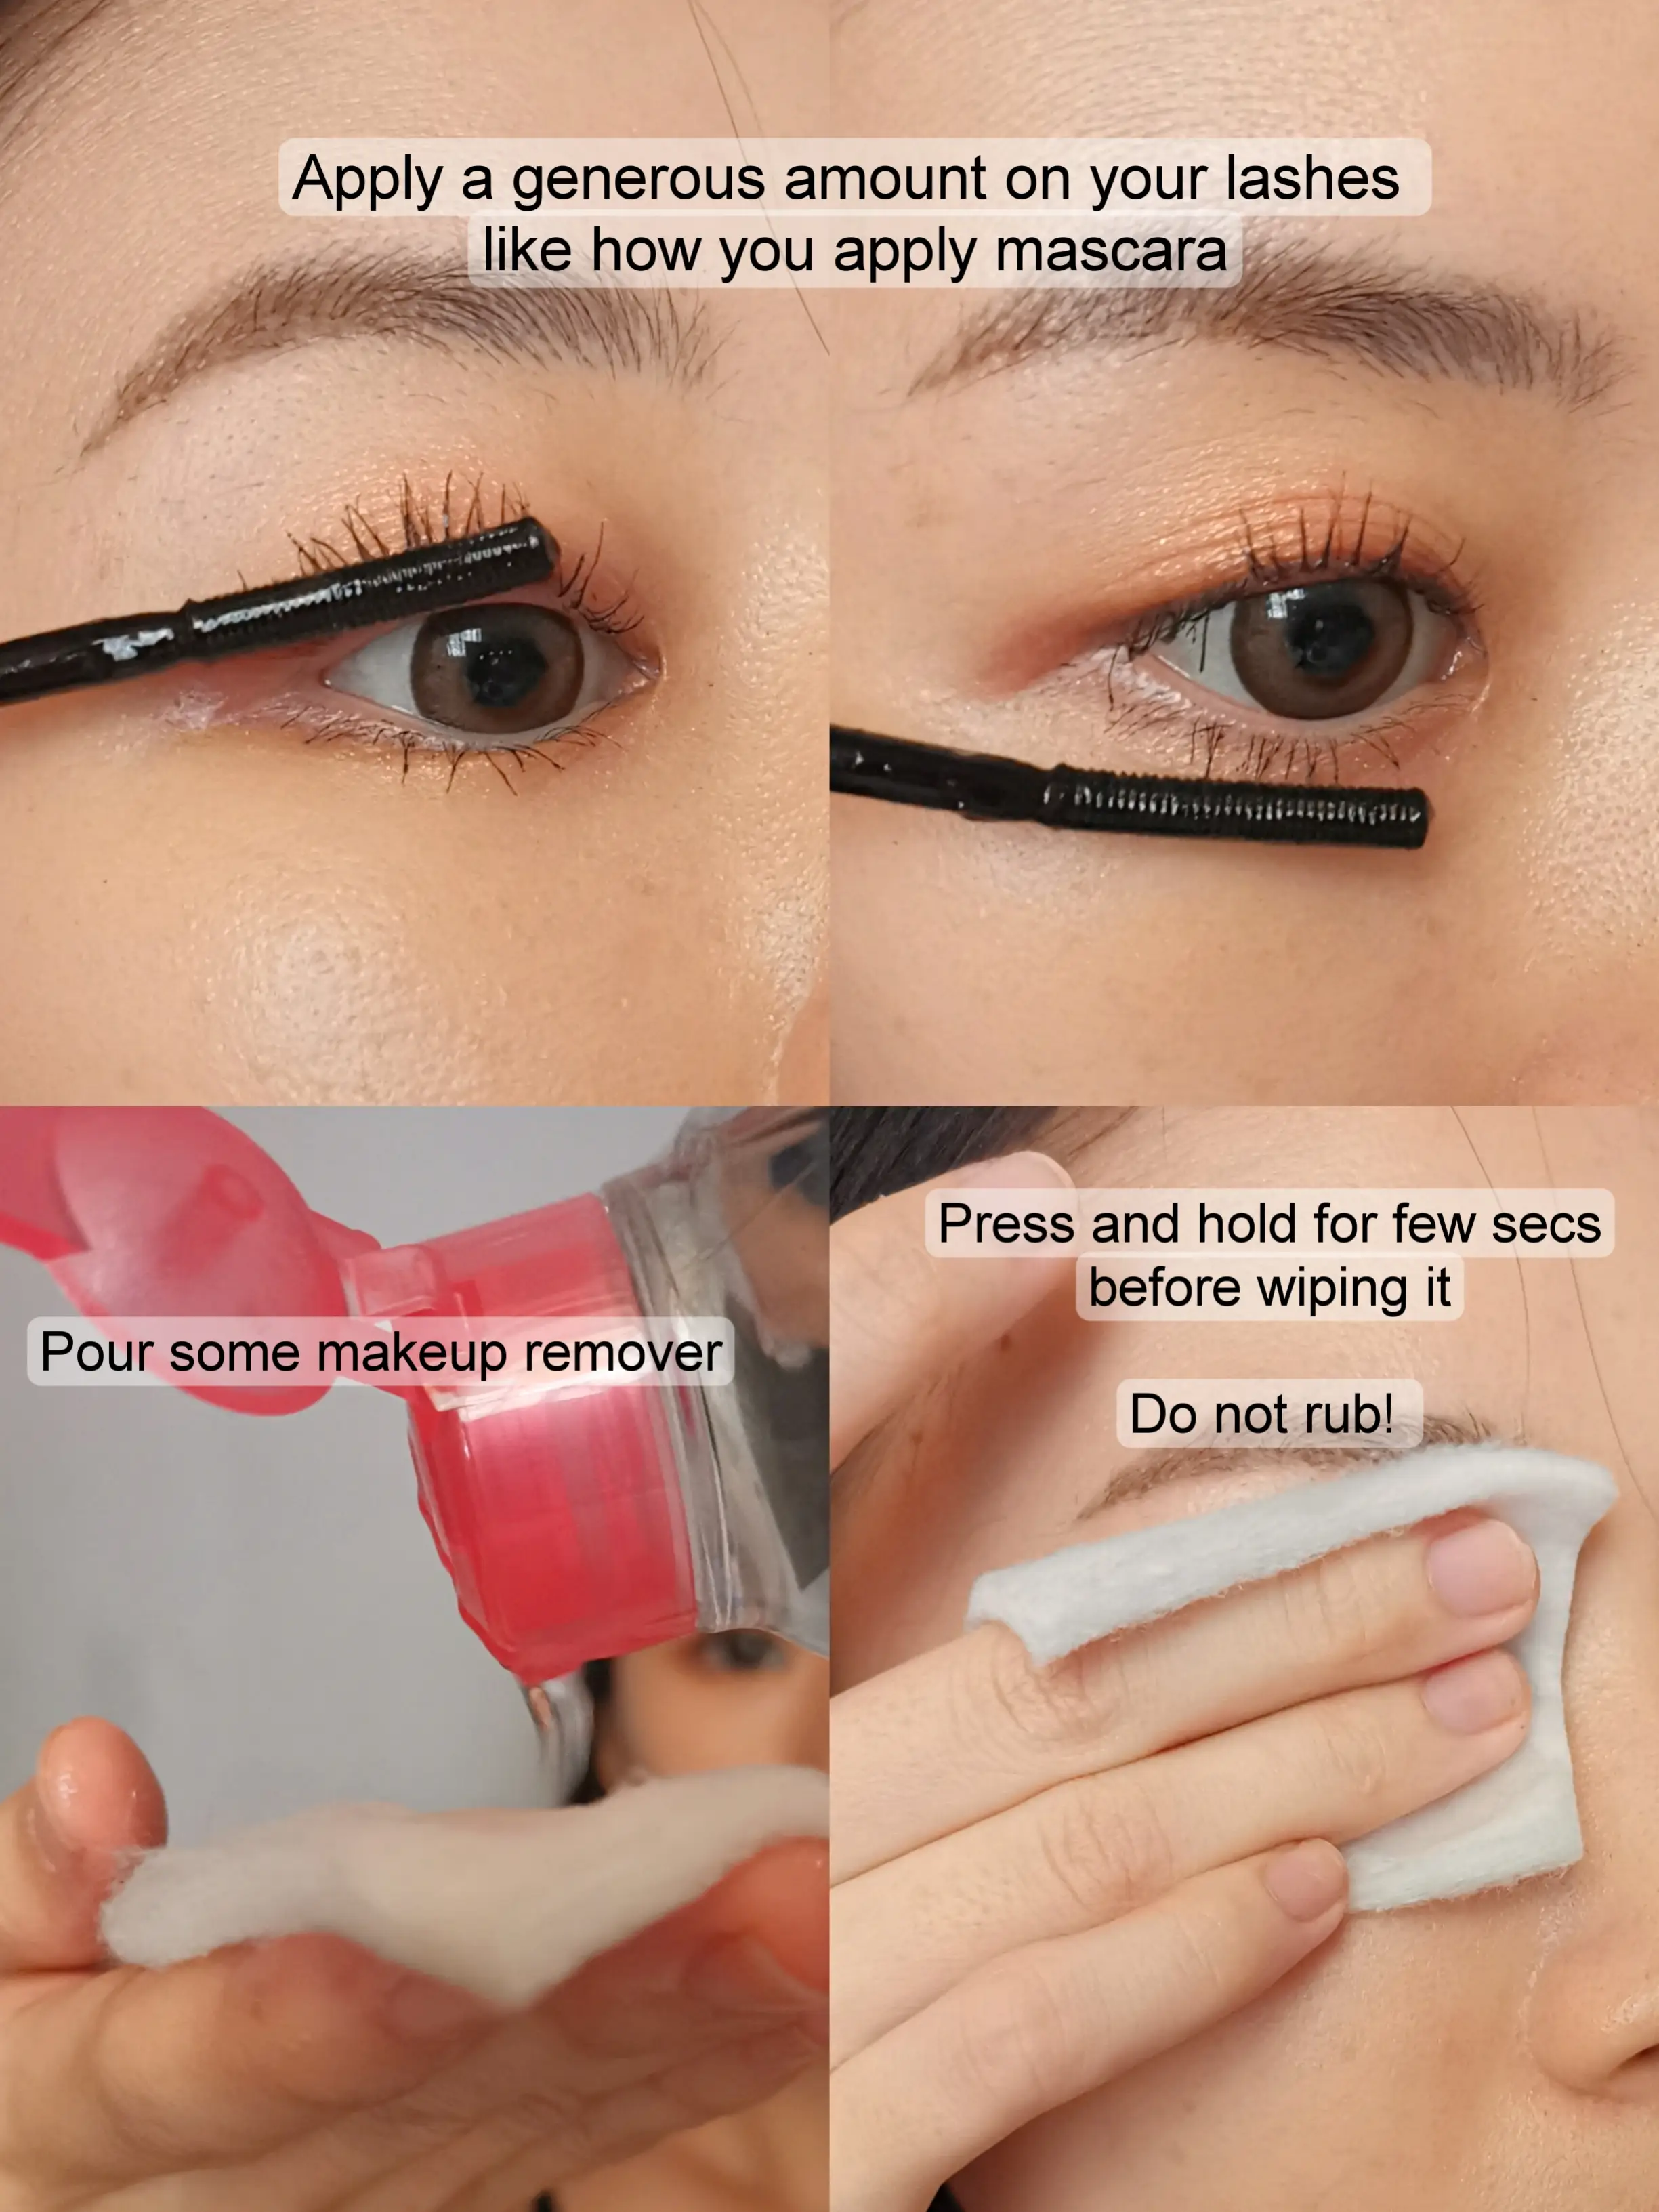 4 Ways to Remove Waterproof Mascara Without Makeup Remover